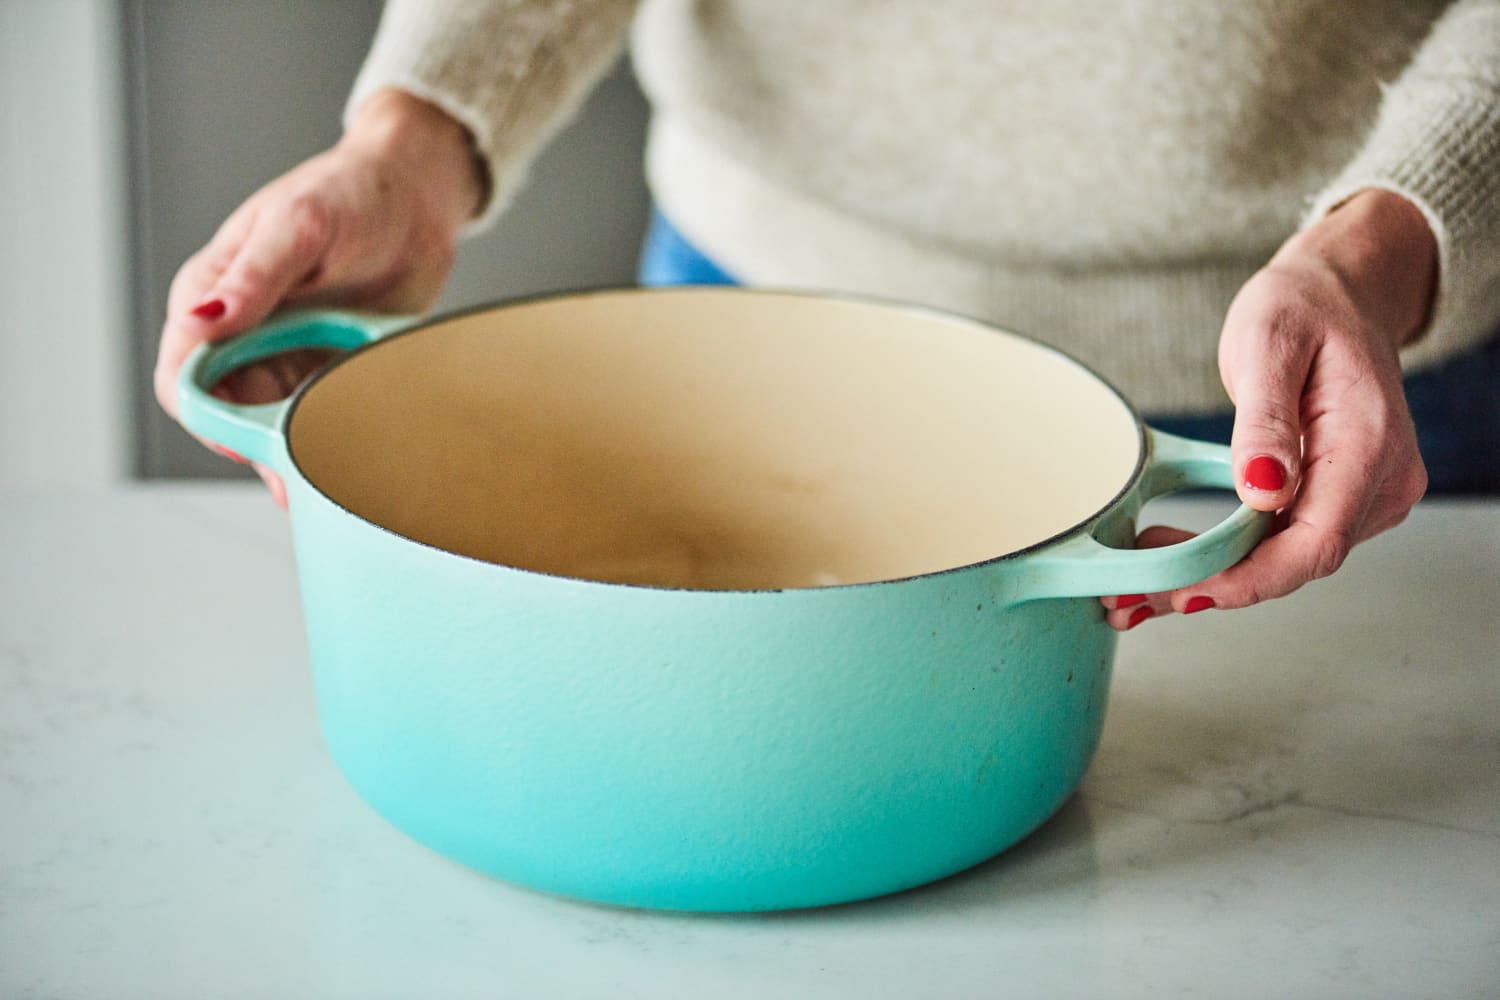 Le Creuset Dutch Oven - Exterior Oven Cleaner